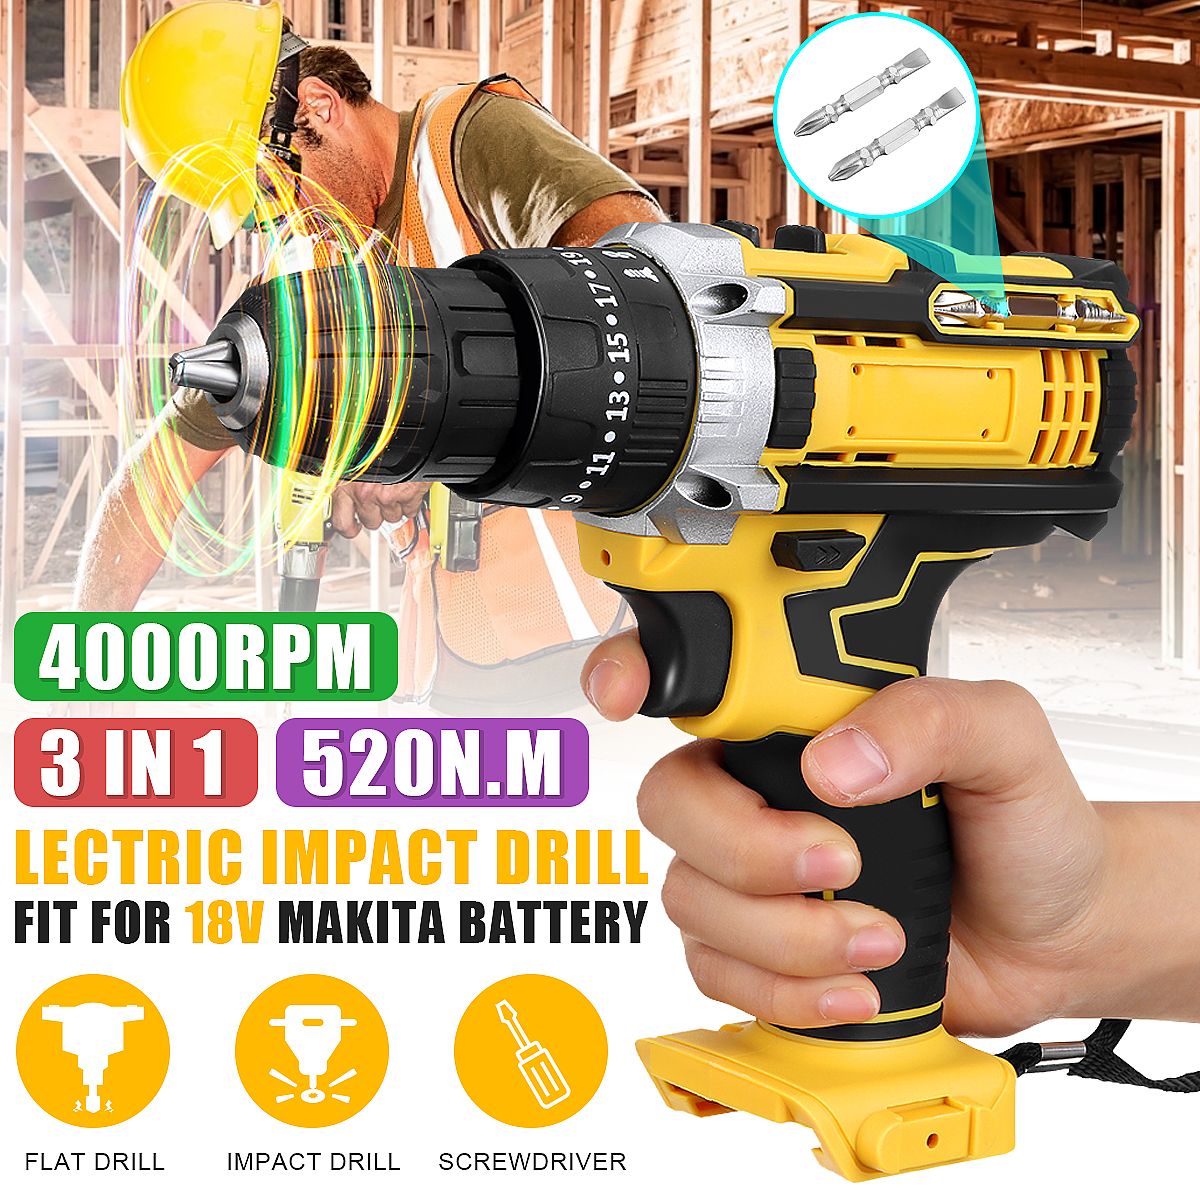 520Nm-Cordless-38-Impact-Drill-Driver-Replacement-for-Makita-18V-Battery-1733292